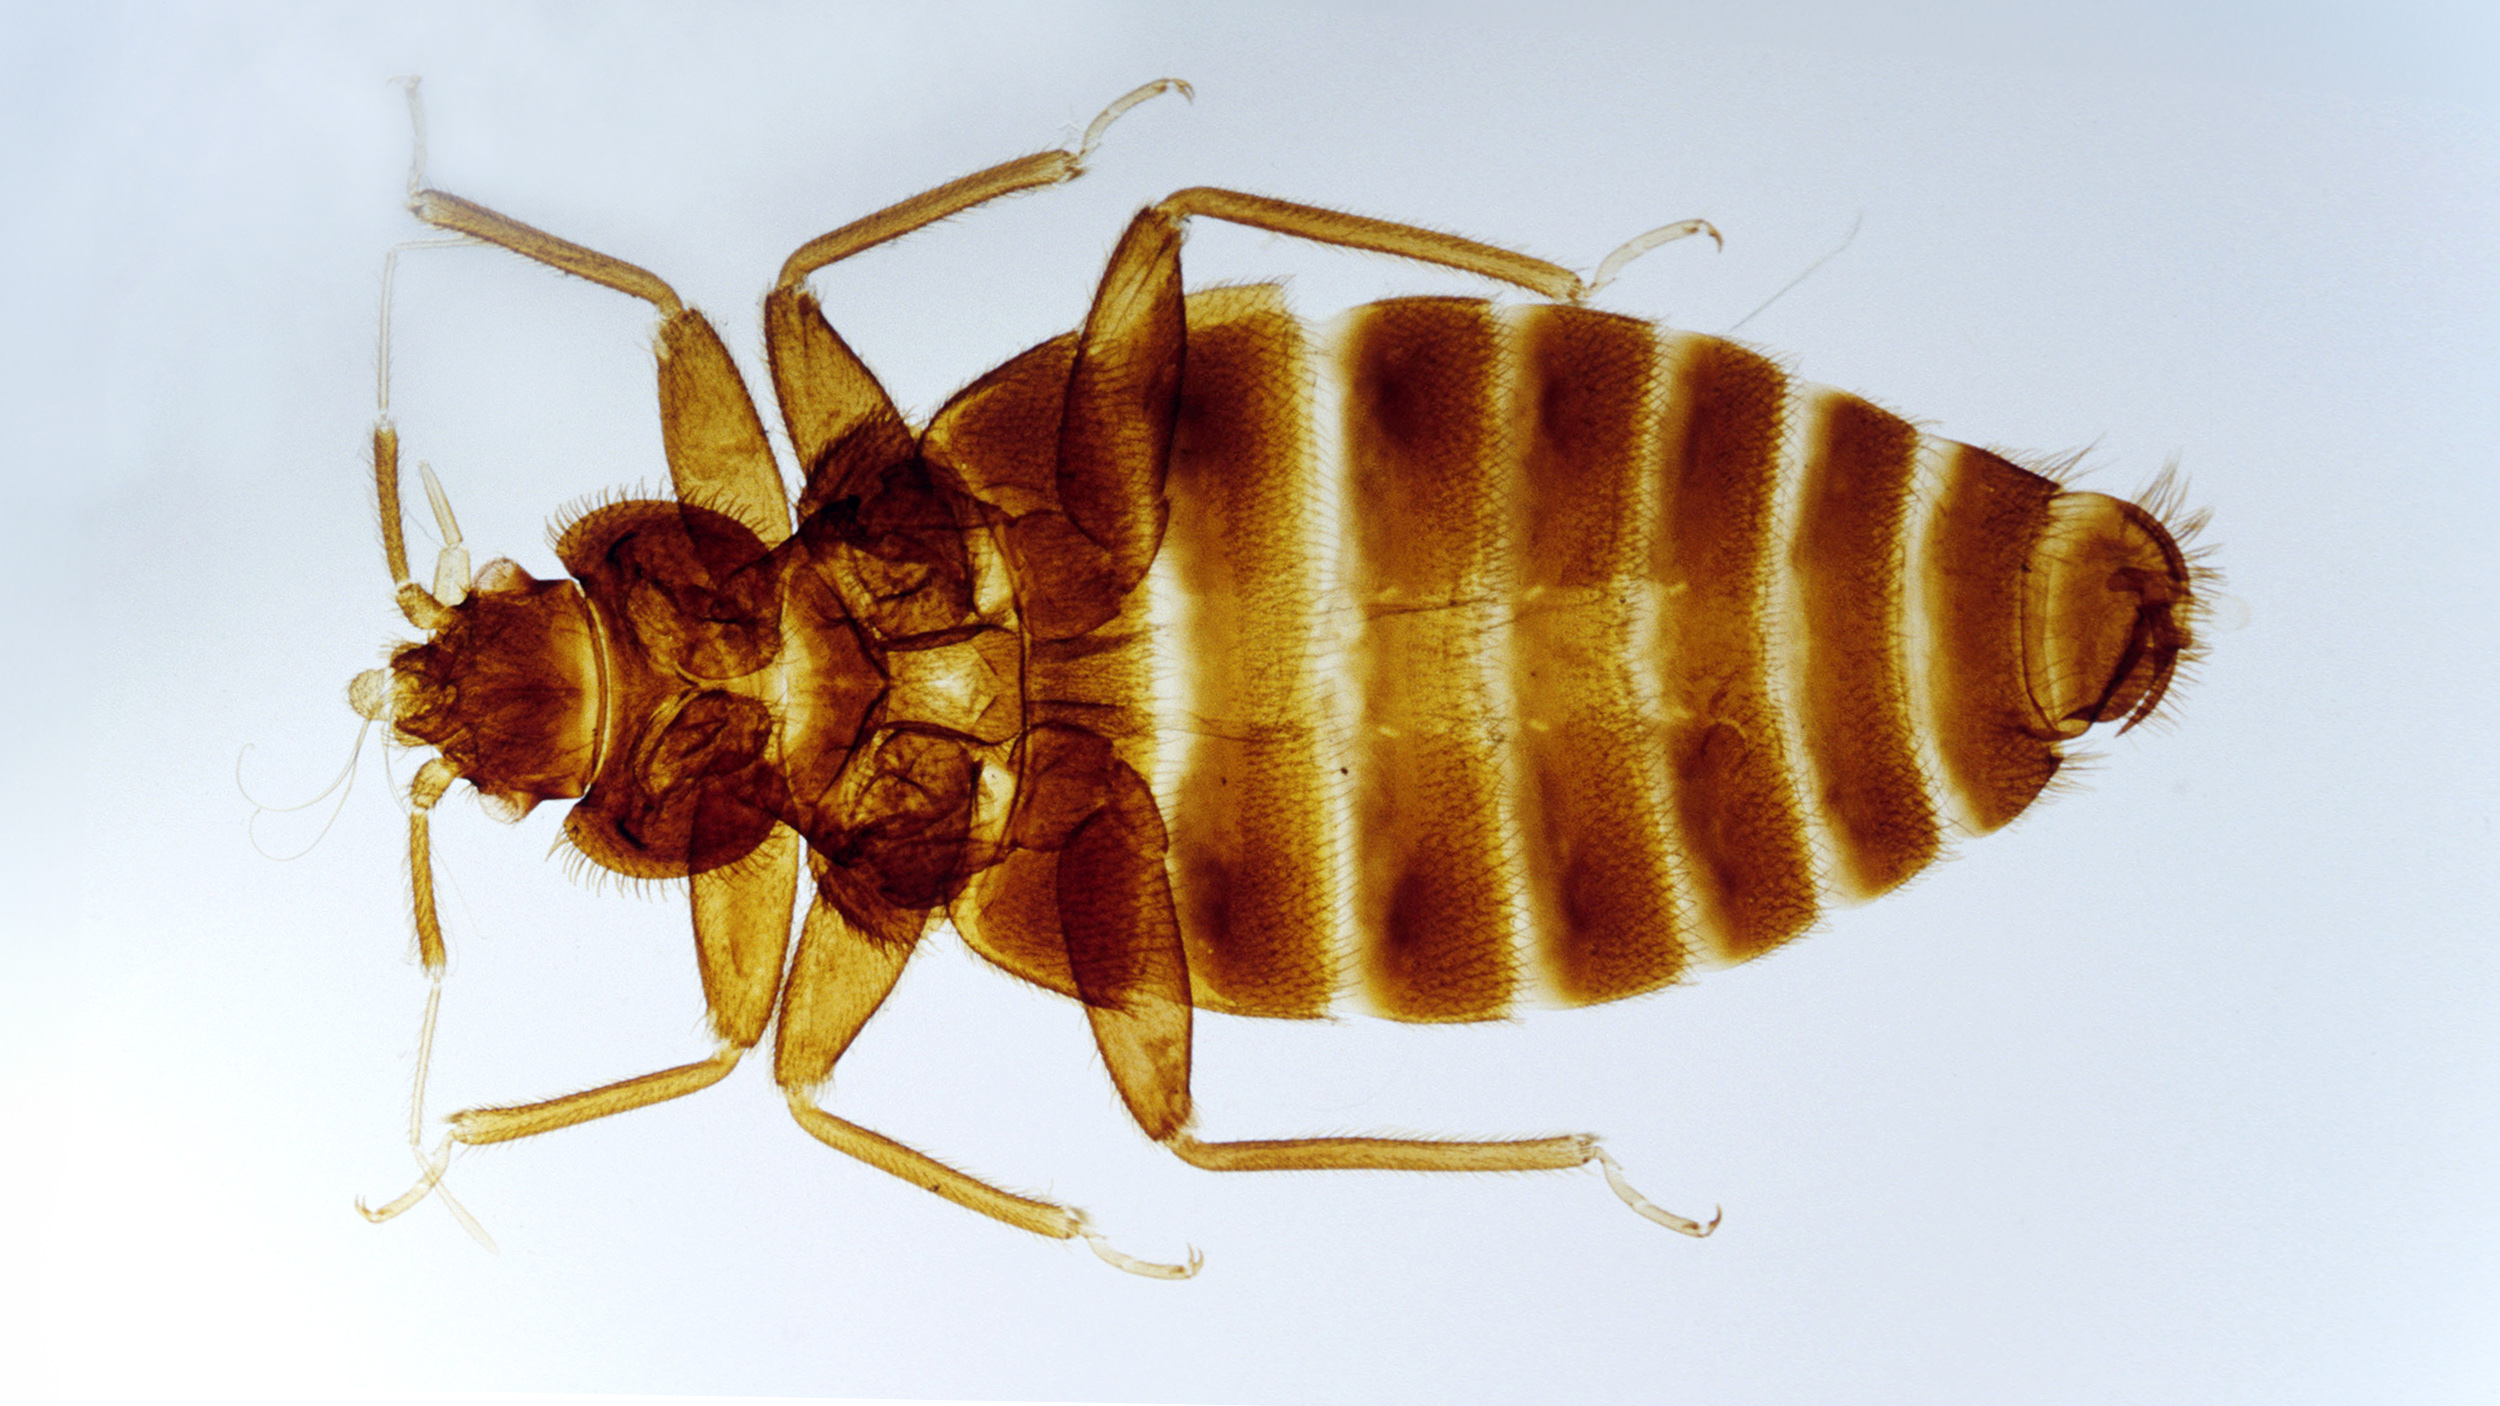 A single bed bug on a white background.